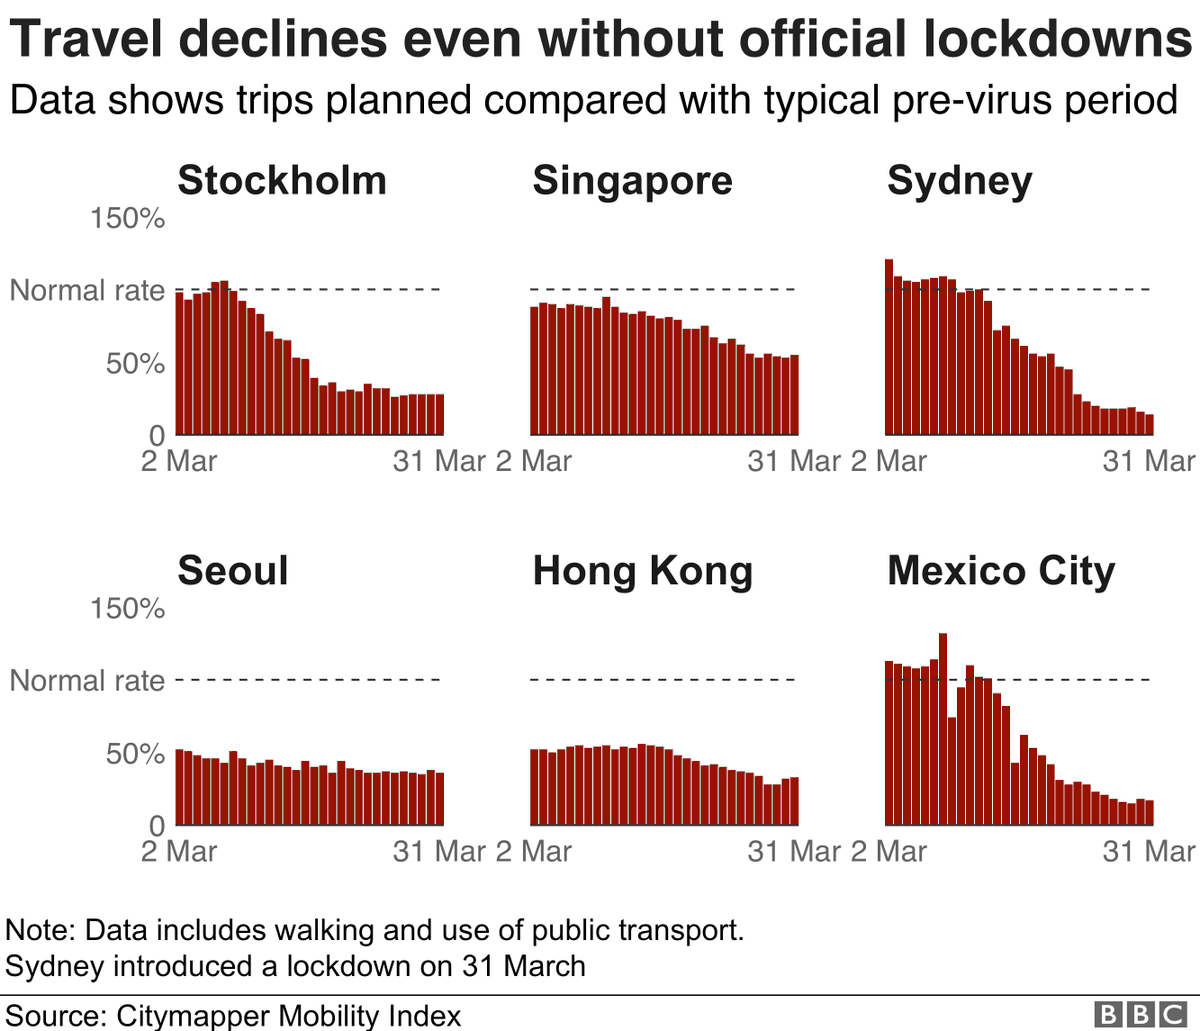 It's not just travel between countries grinding to a halt.Journeys within the world's major cities have plummeted, even where there aren't official lockdowns yet.In London, New York and Paris people made less than one tenth as many trips as normal.  https://www.bbc.co.uk/news/world-52103747